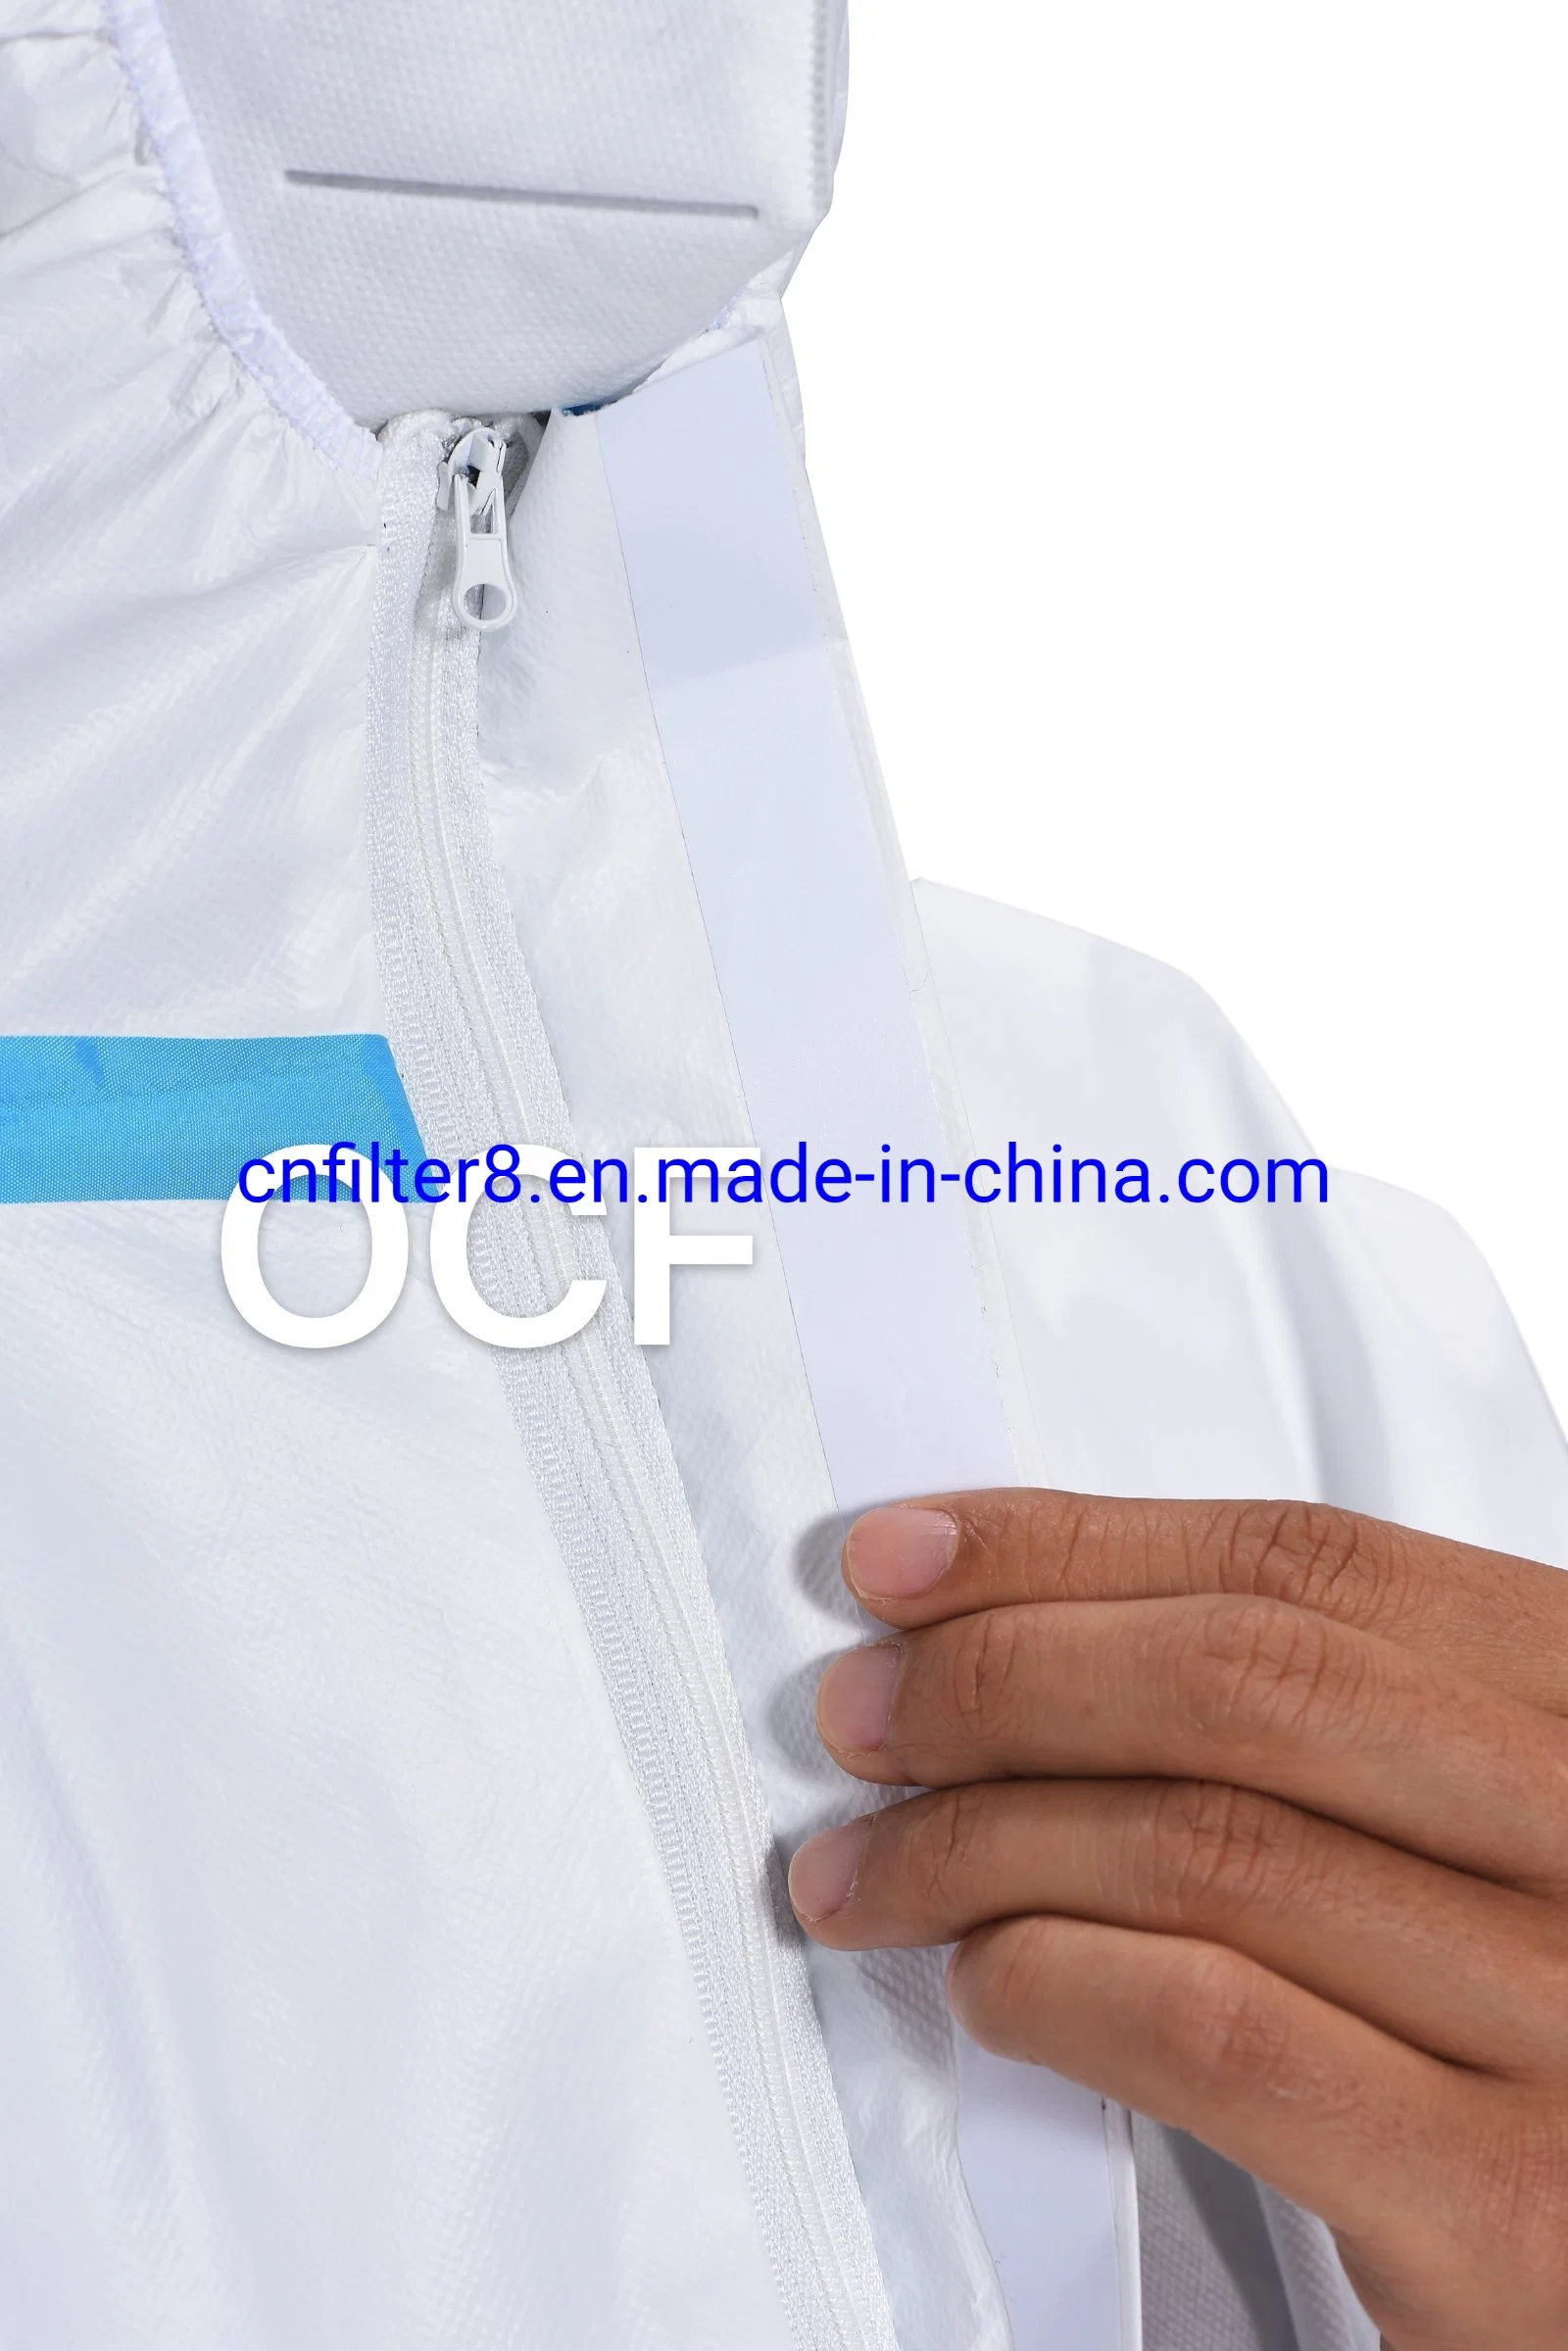 PPE Biosecurity Hospital Protective Coverall Disposable Medical Clothing